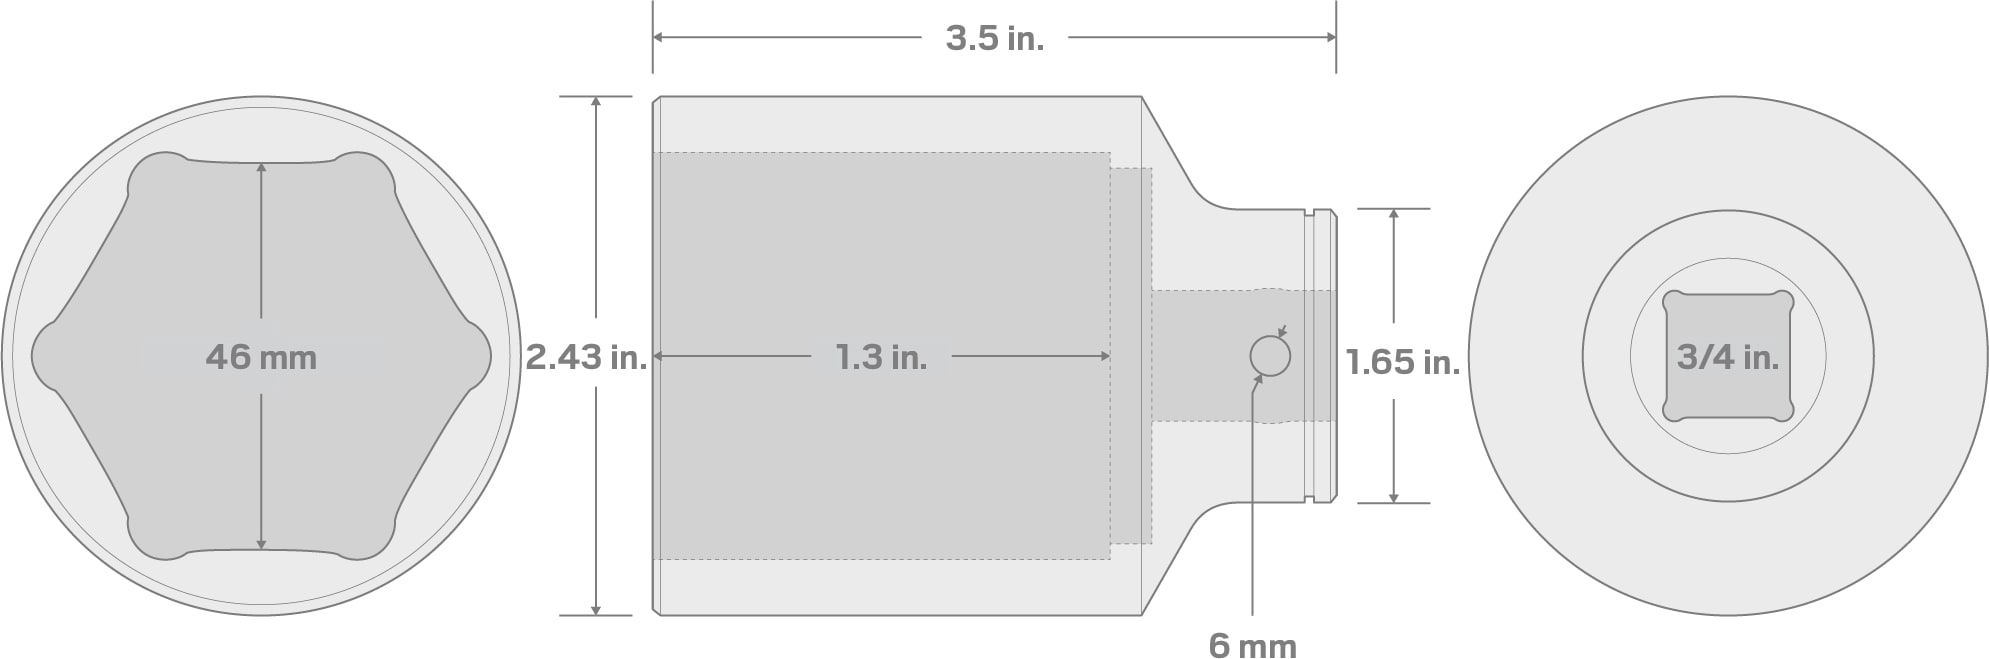 Specs for 3/4 Inch Drive x 46 mm Deep 6-Point Socket